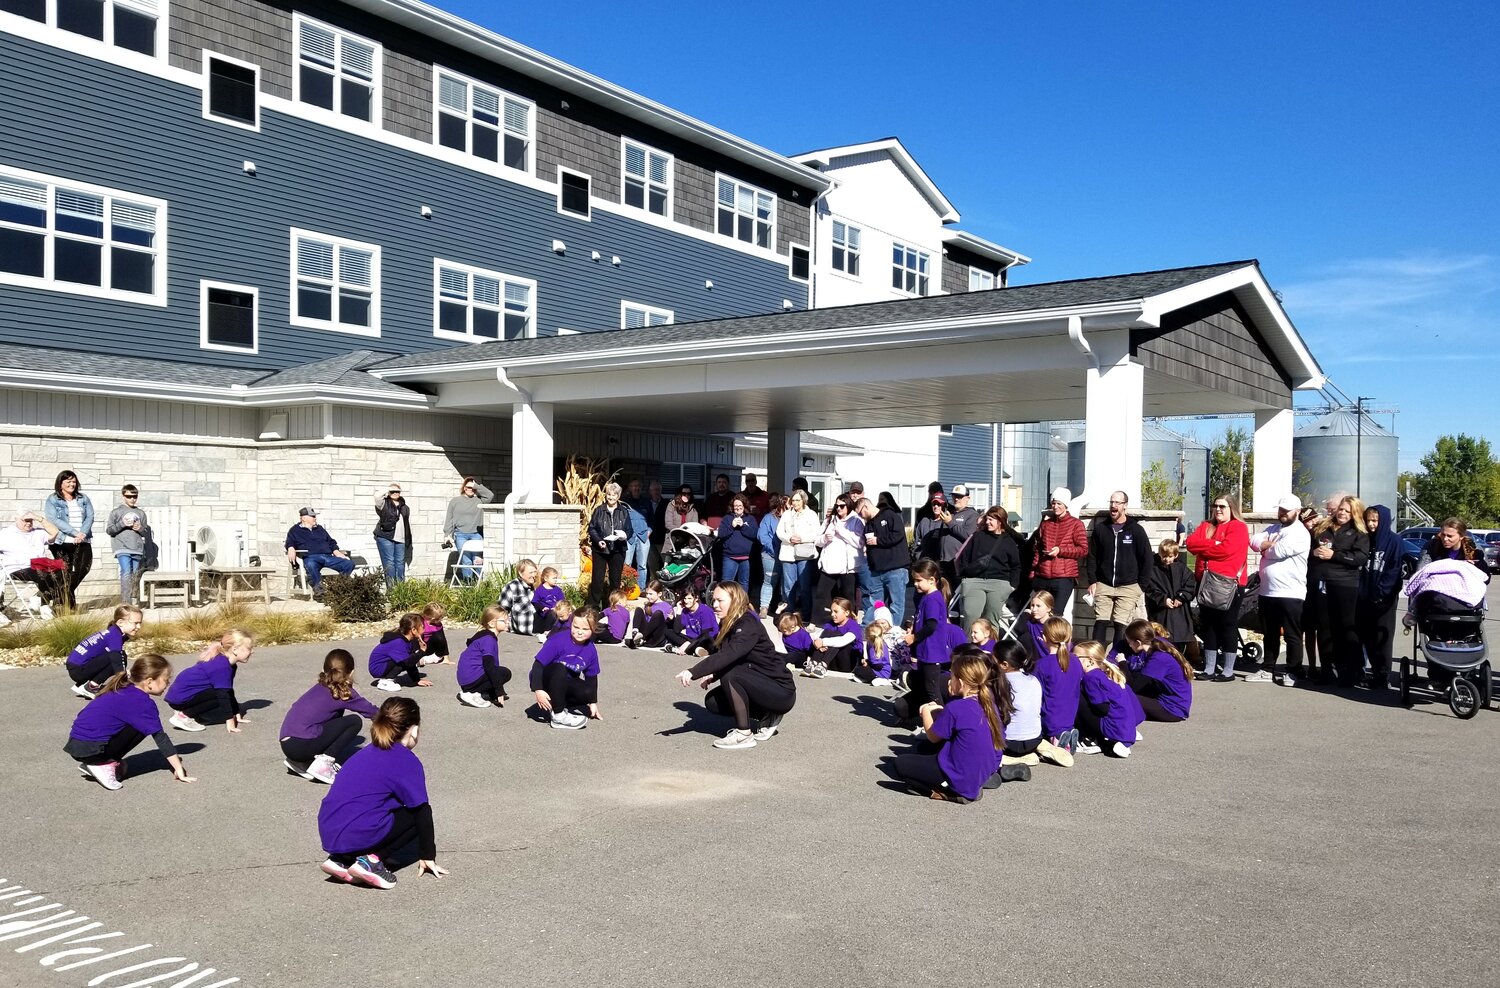 group of young Just For Kix dancers prepare to start their routine.  Visitors enjoyed a number of entertainment options at the Goodhue Living property on October 15th.  See more pictures on their Facebook page, https://www.facebook.com/GoodhueLiving.